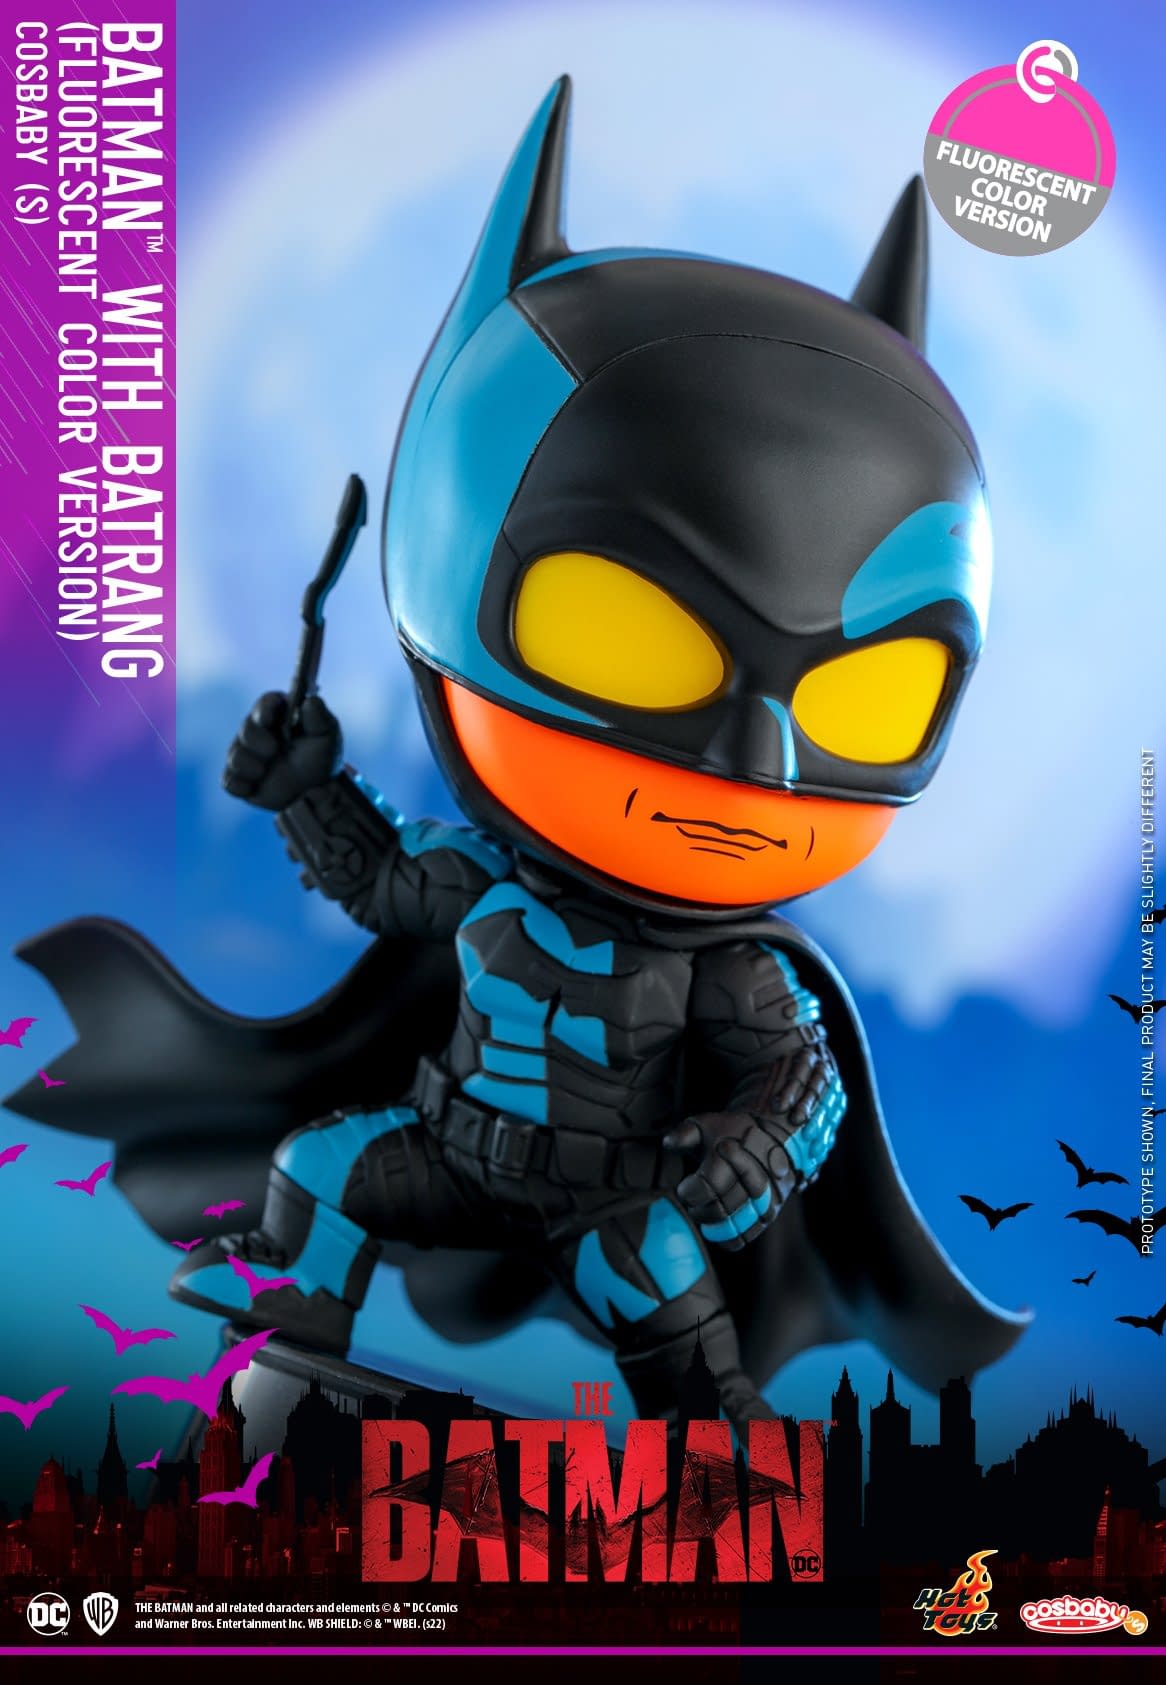 The Batman Gets Trippy with New Popping Cosbaby Figures from Hot Toys